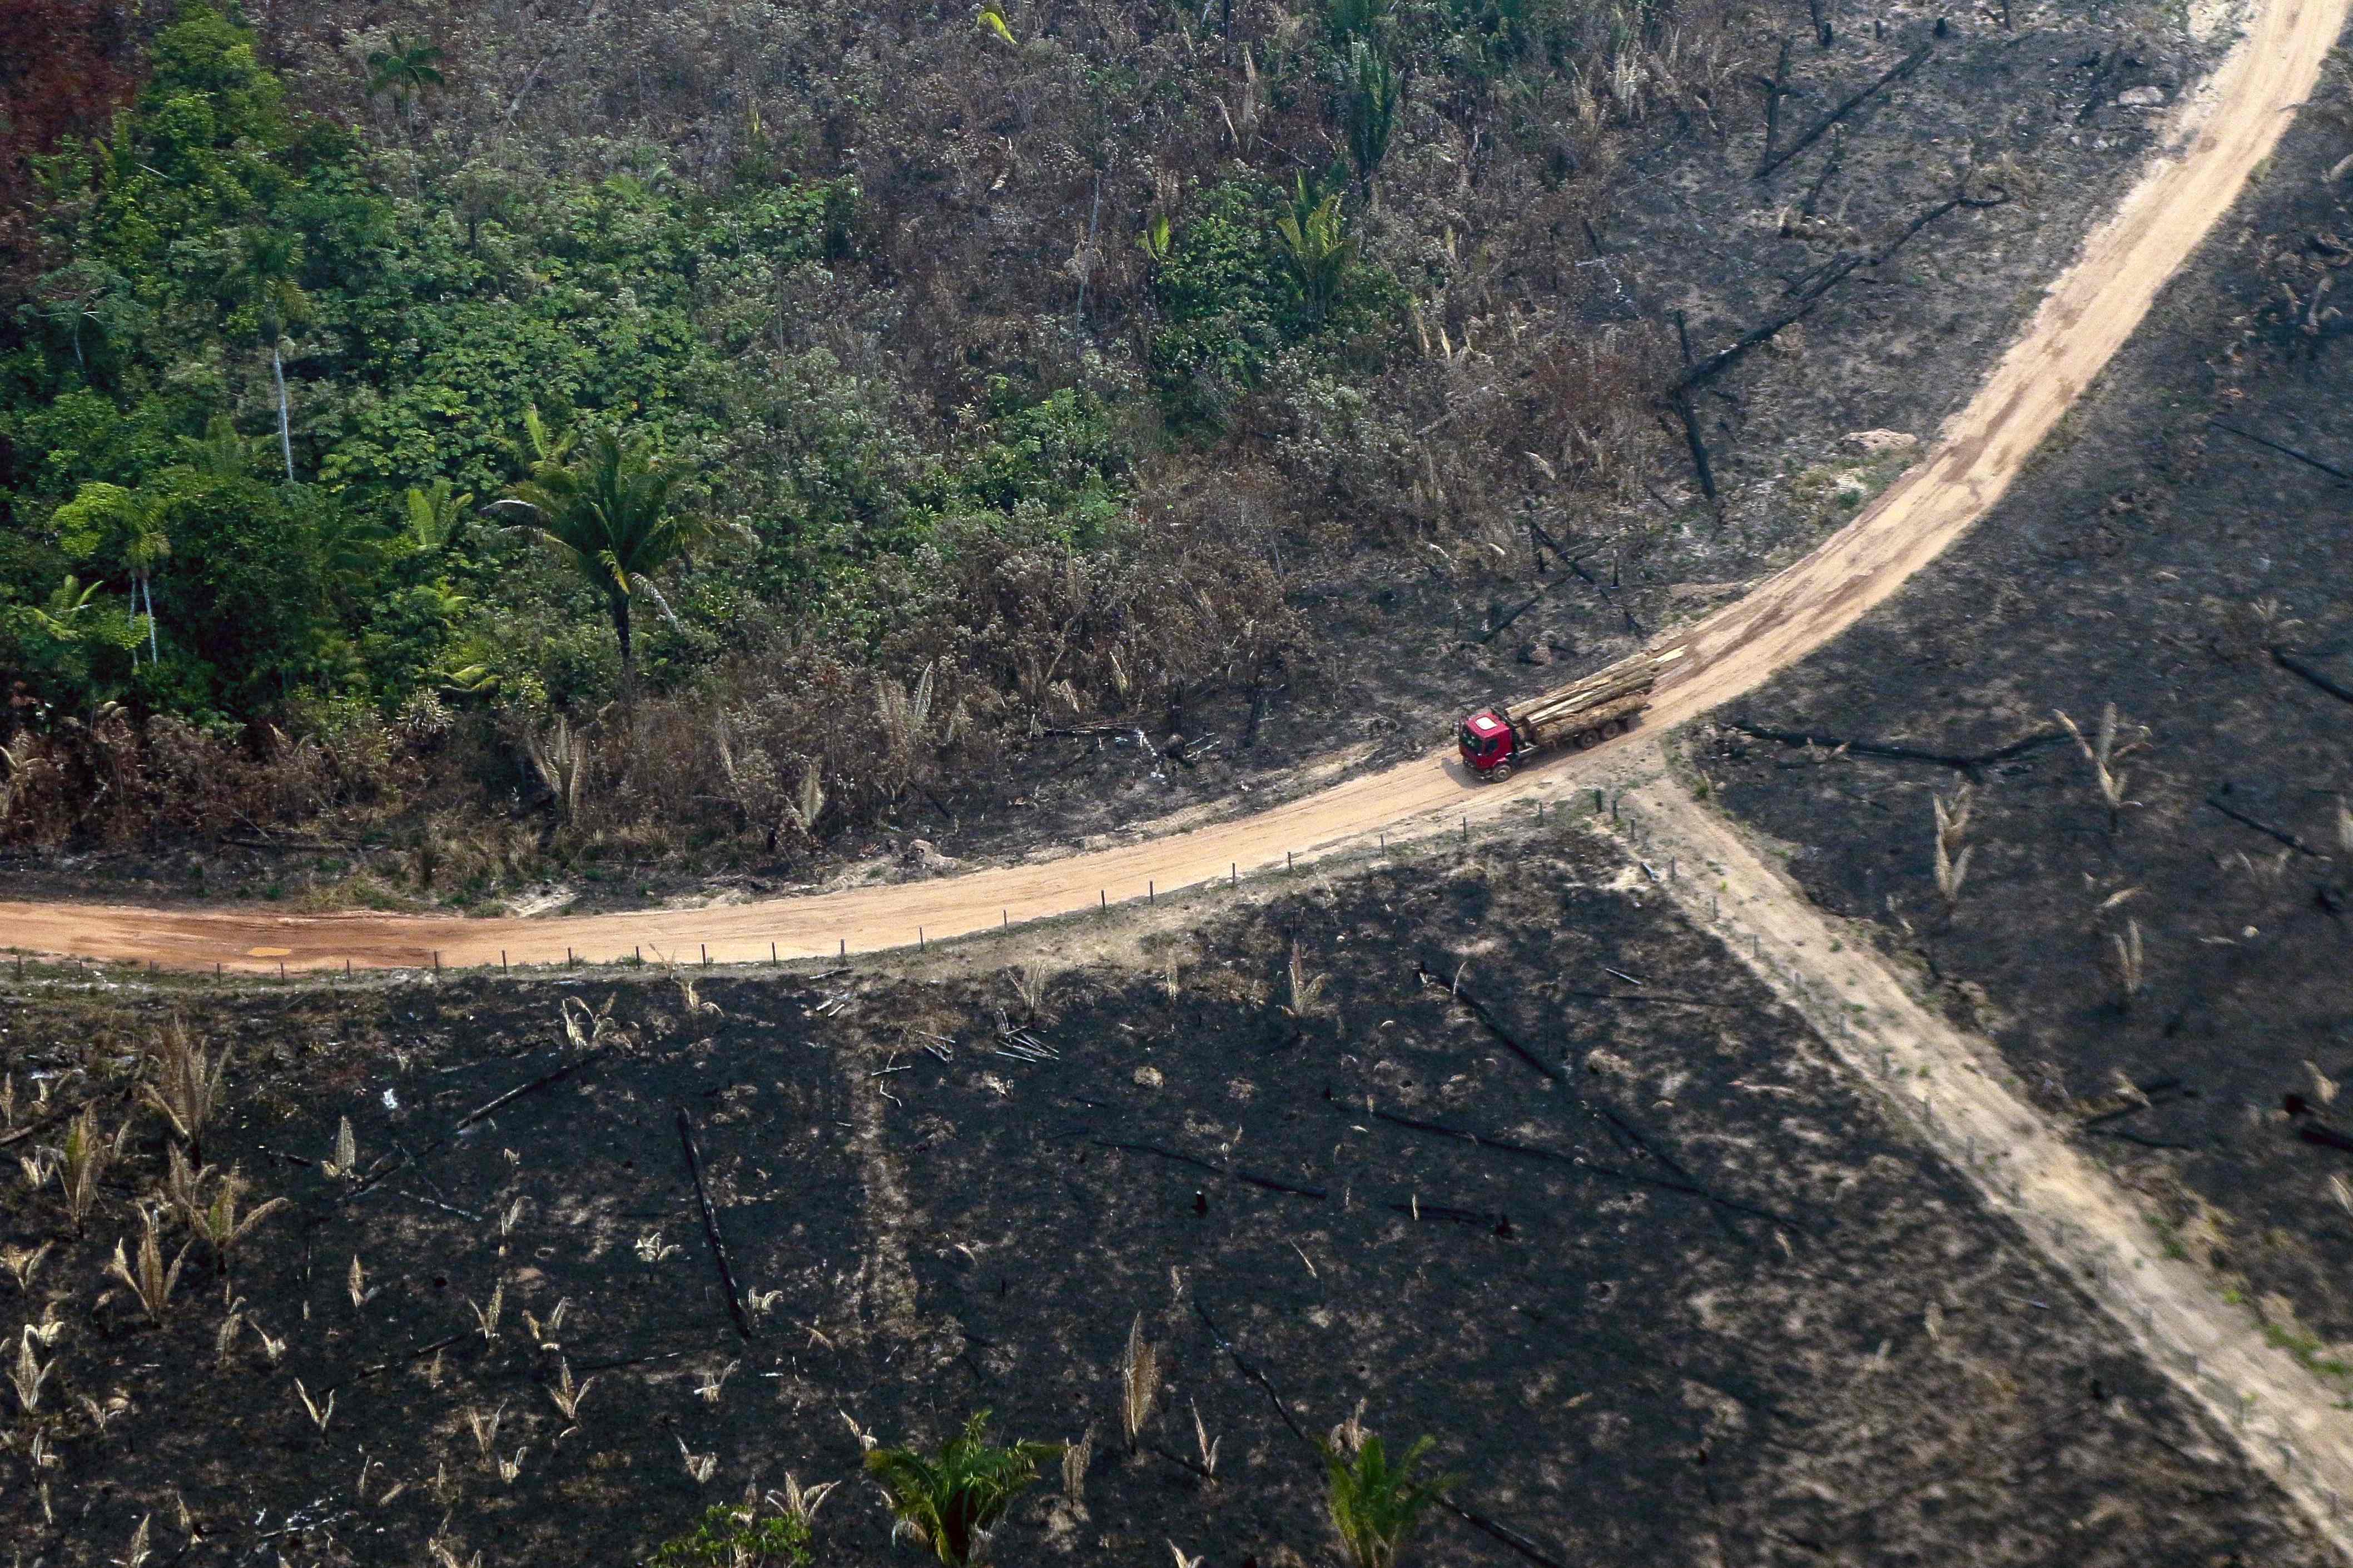 An aerial view of burnt areas of the Amazon rainforest in 2019